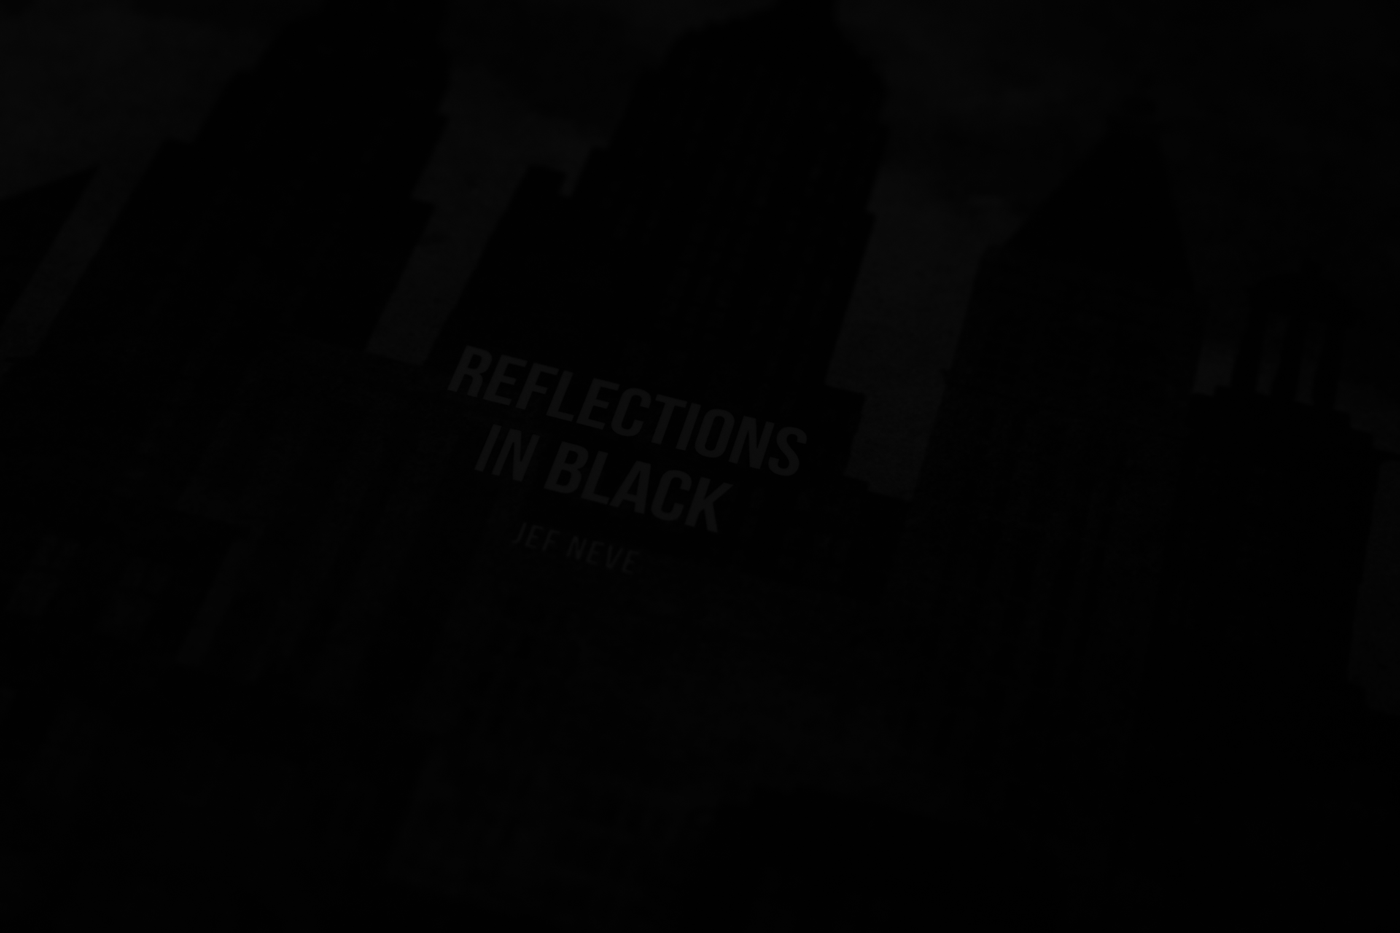 Reflections in Black